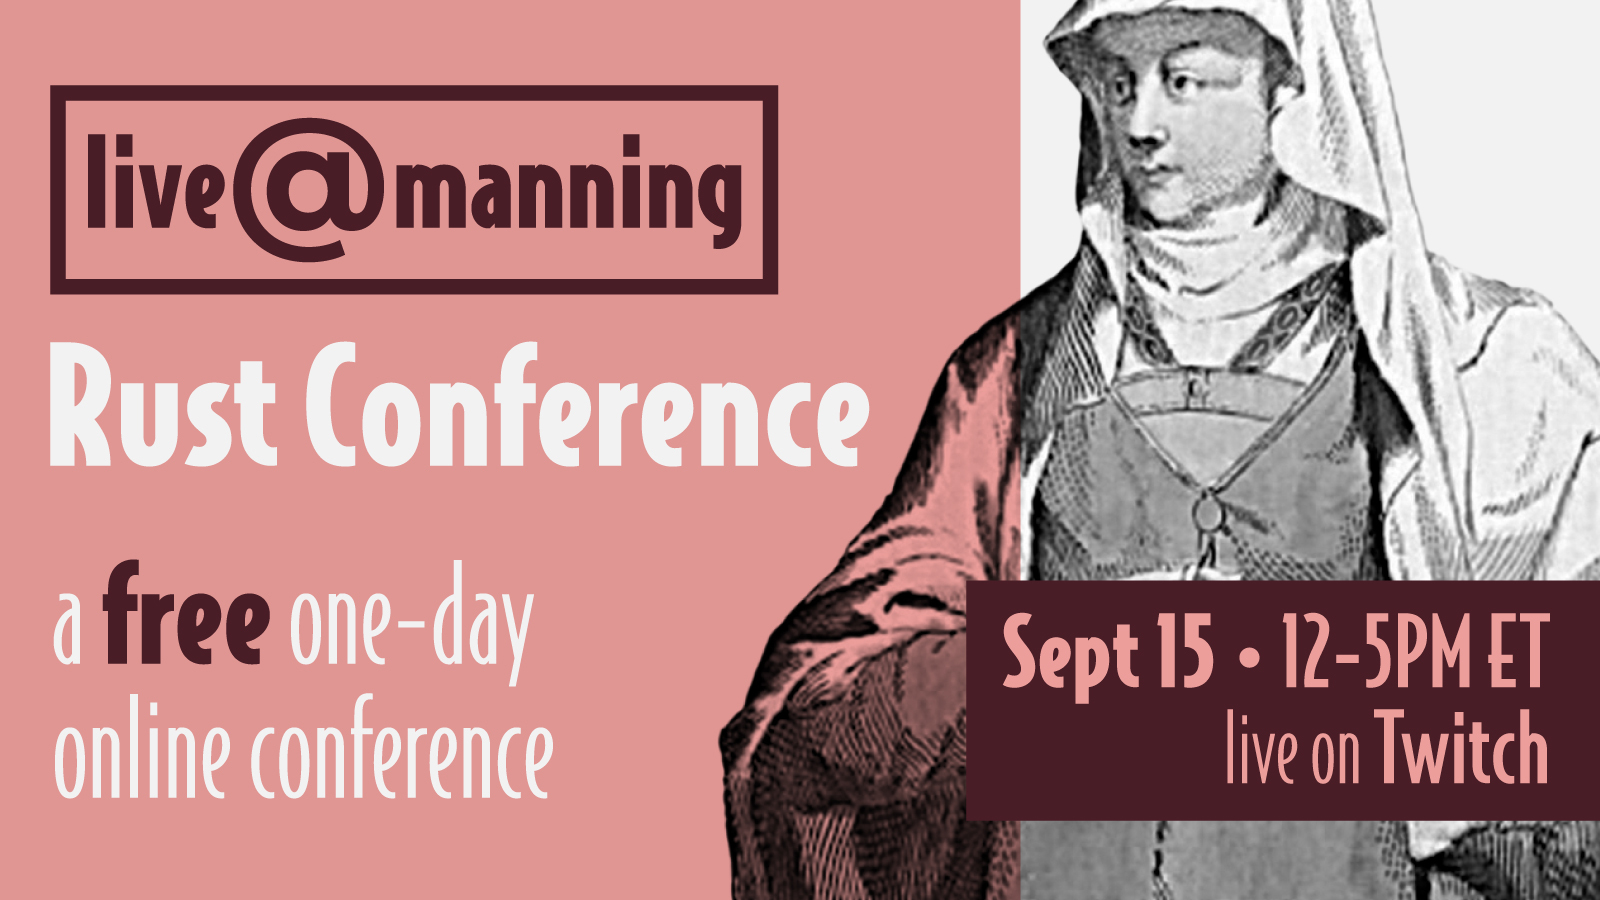 live@manning Rust Conference